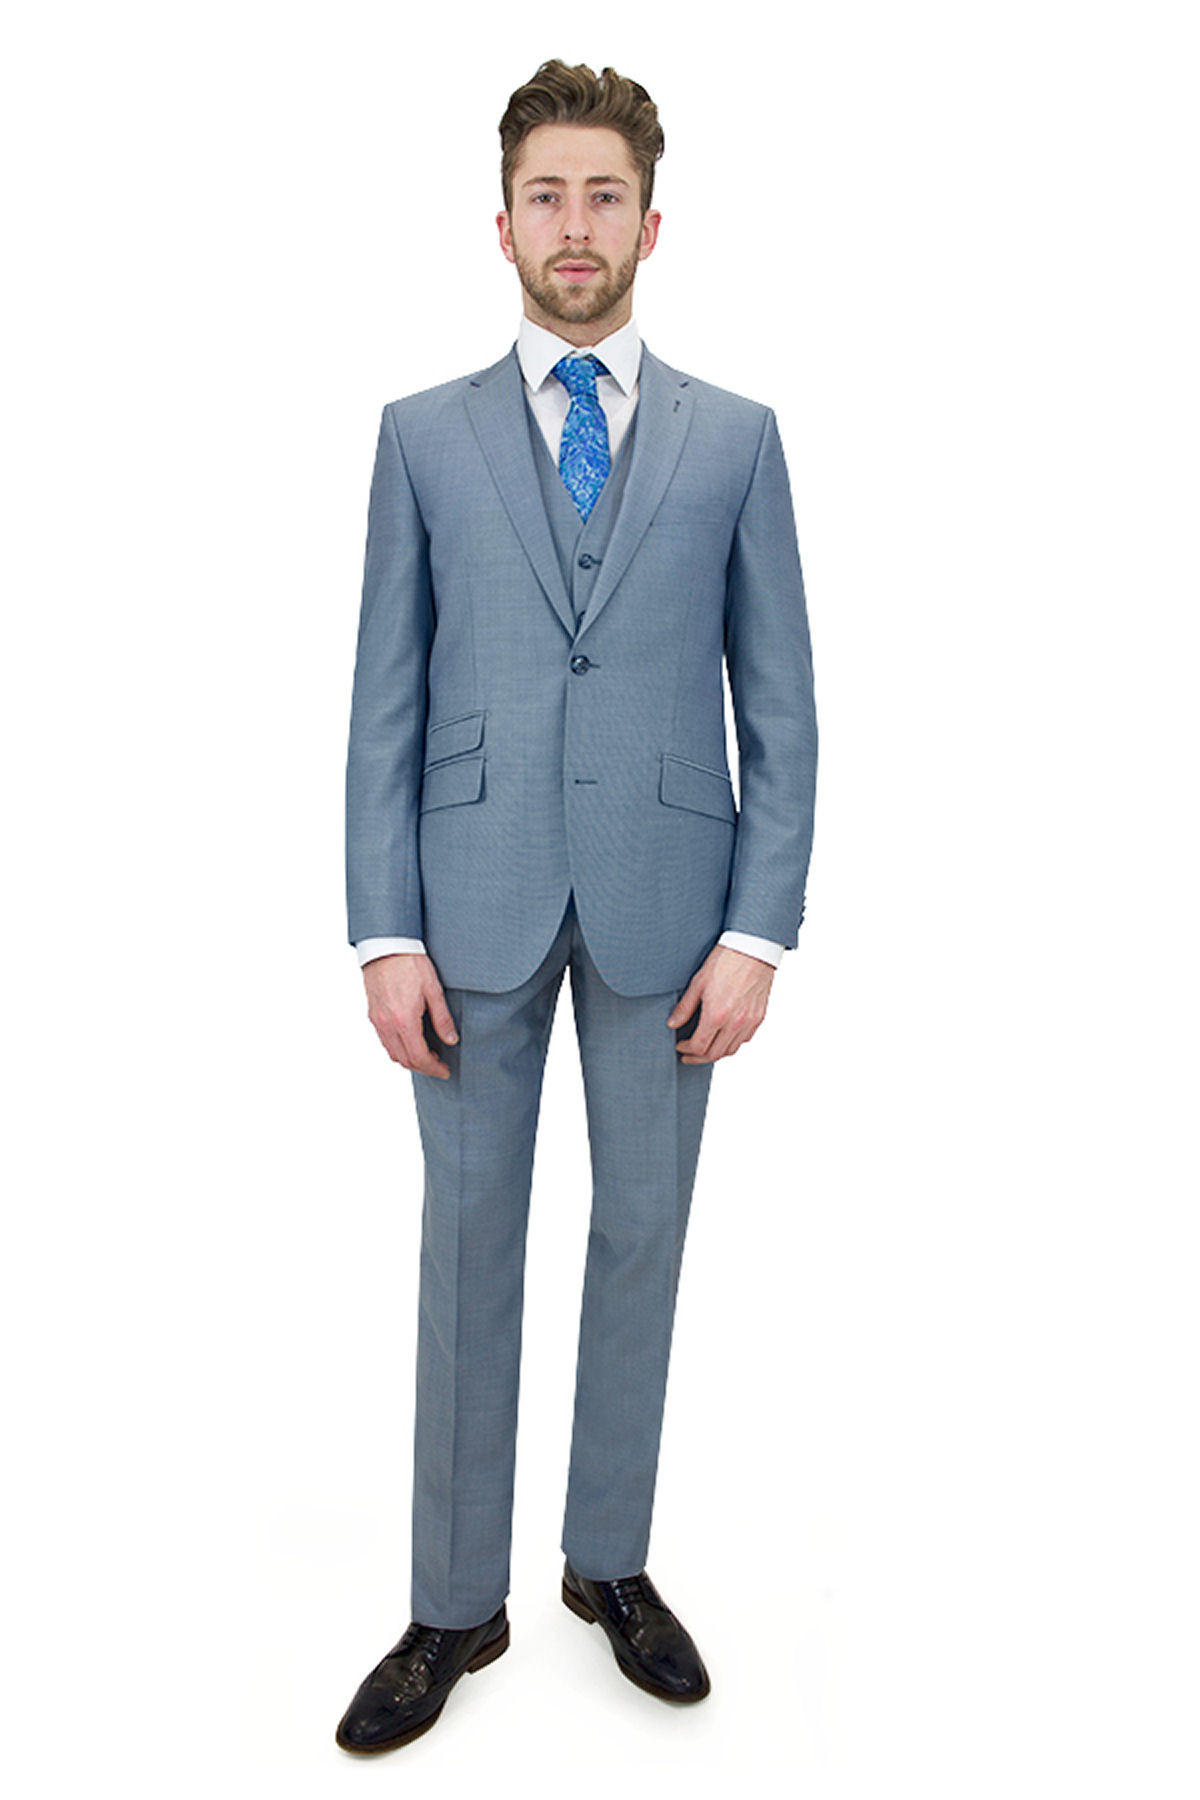 Randolph 3 Piece Light Blue Mens Wedding Suit from Without